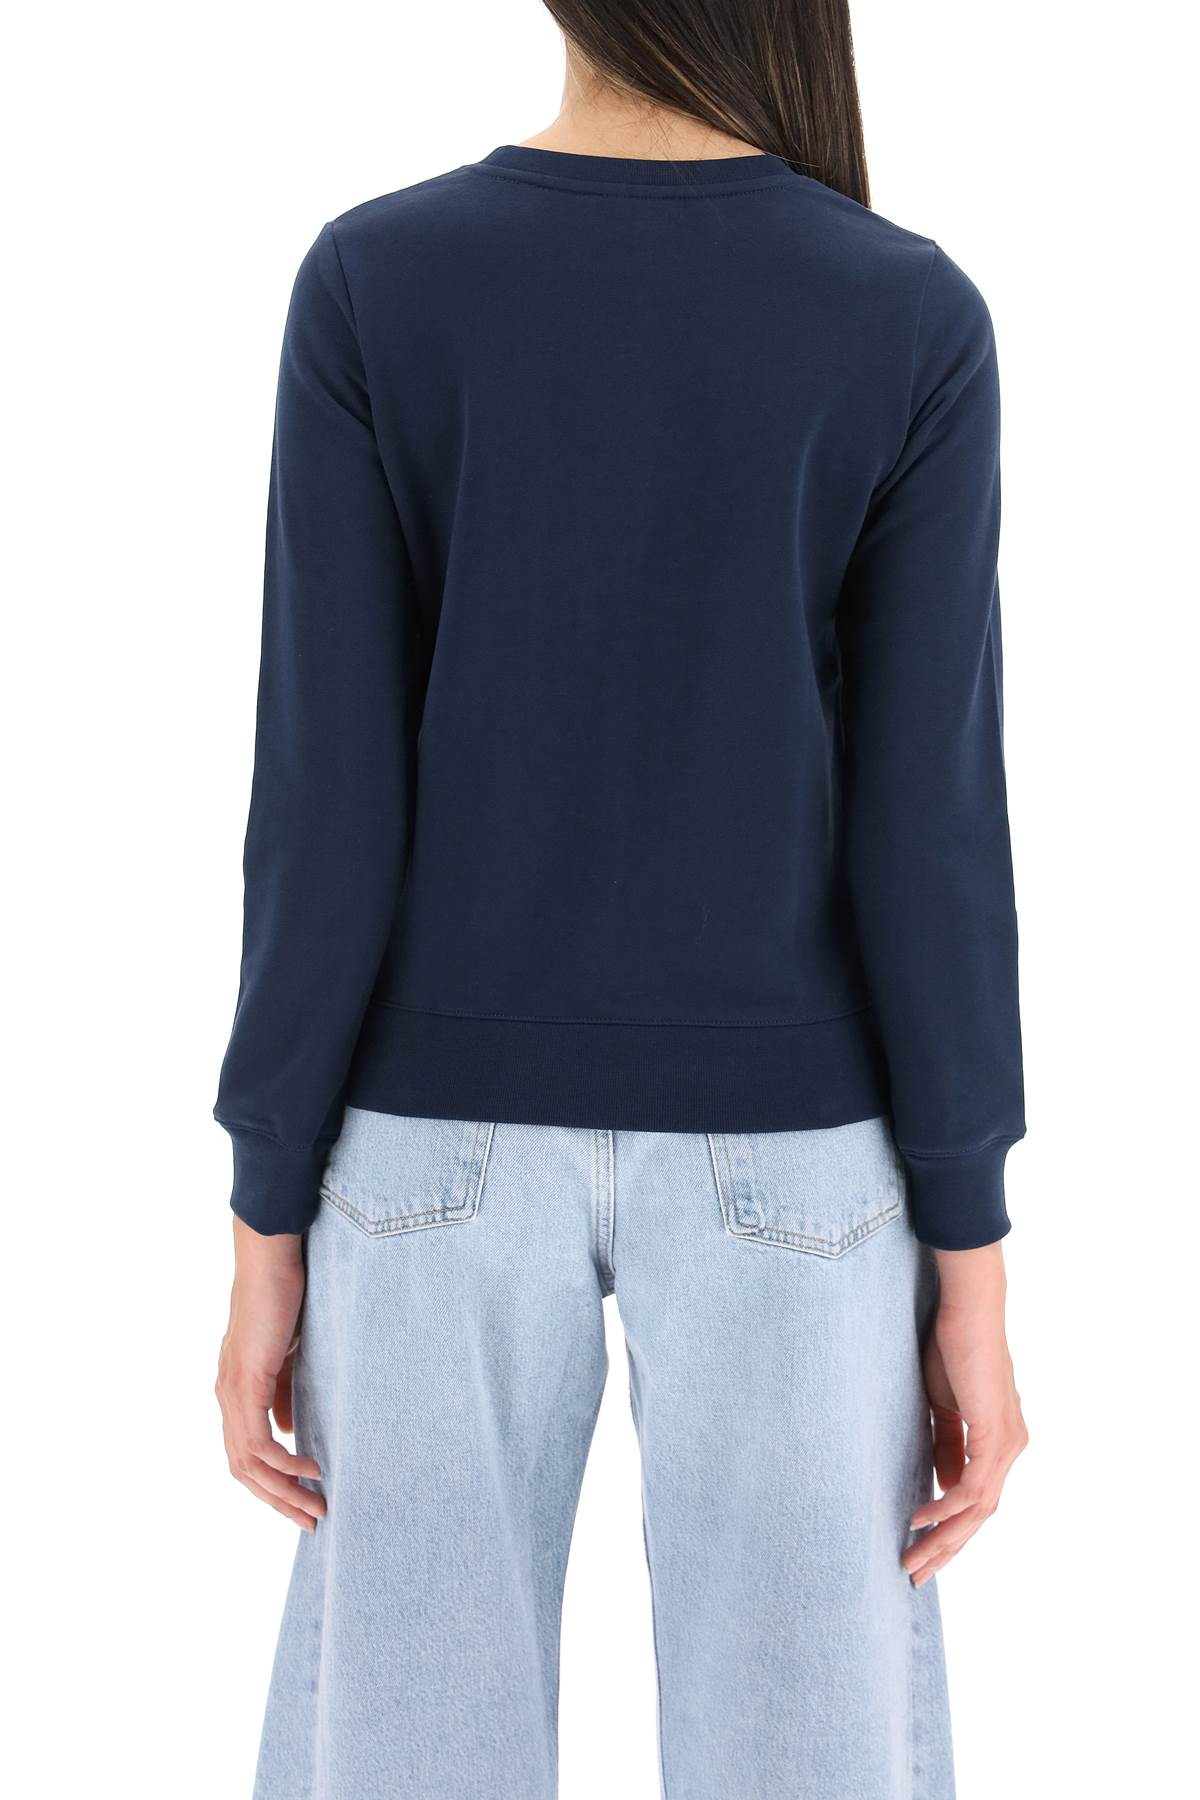 Shop Apc Tina Sweatshirt With Embroidered Logo In Blue, White